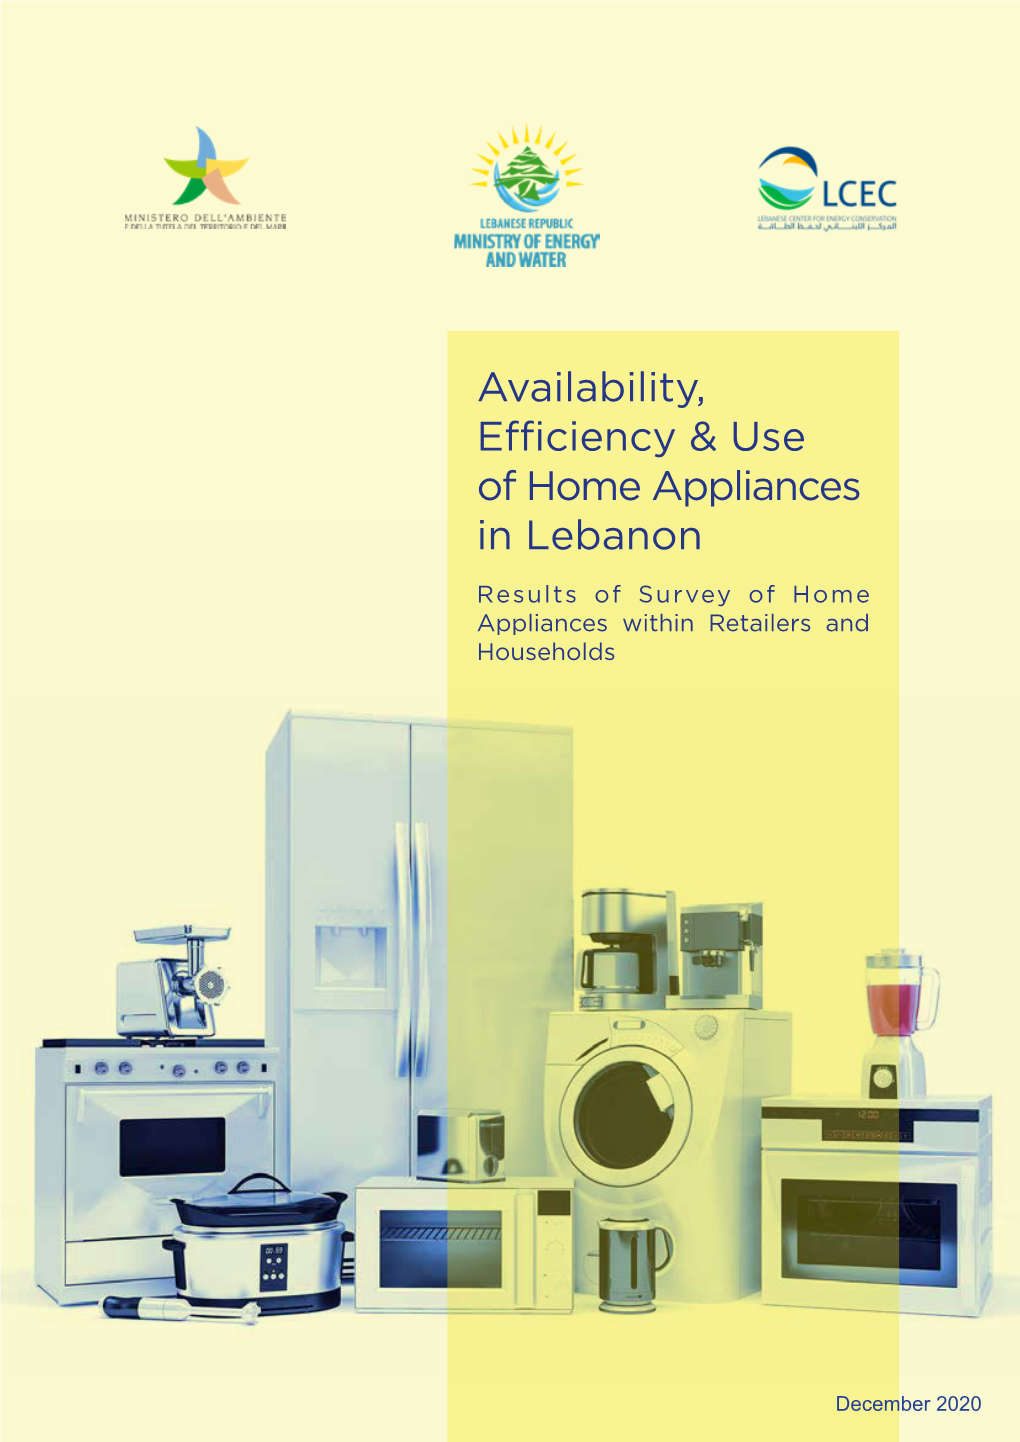 Availability, Efficiency & Use of Home Appliances in Lebanon